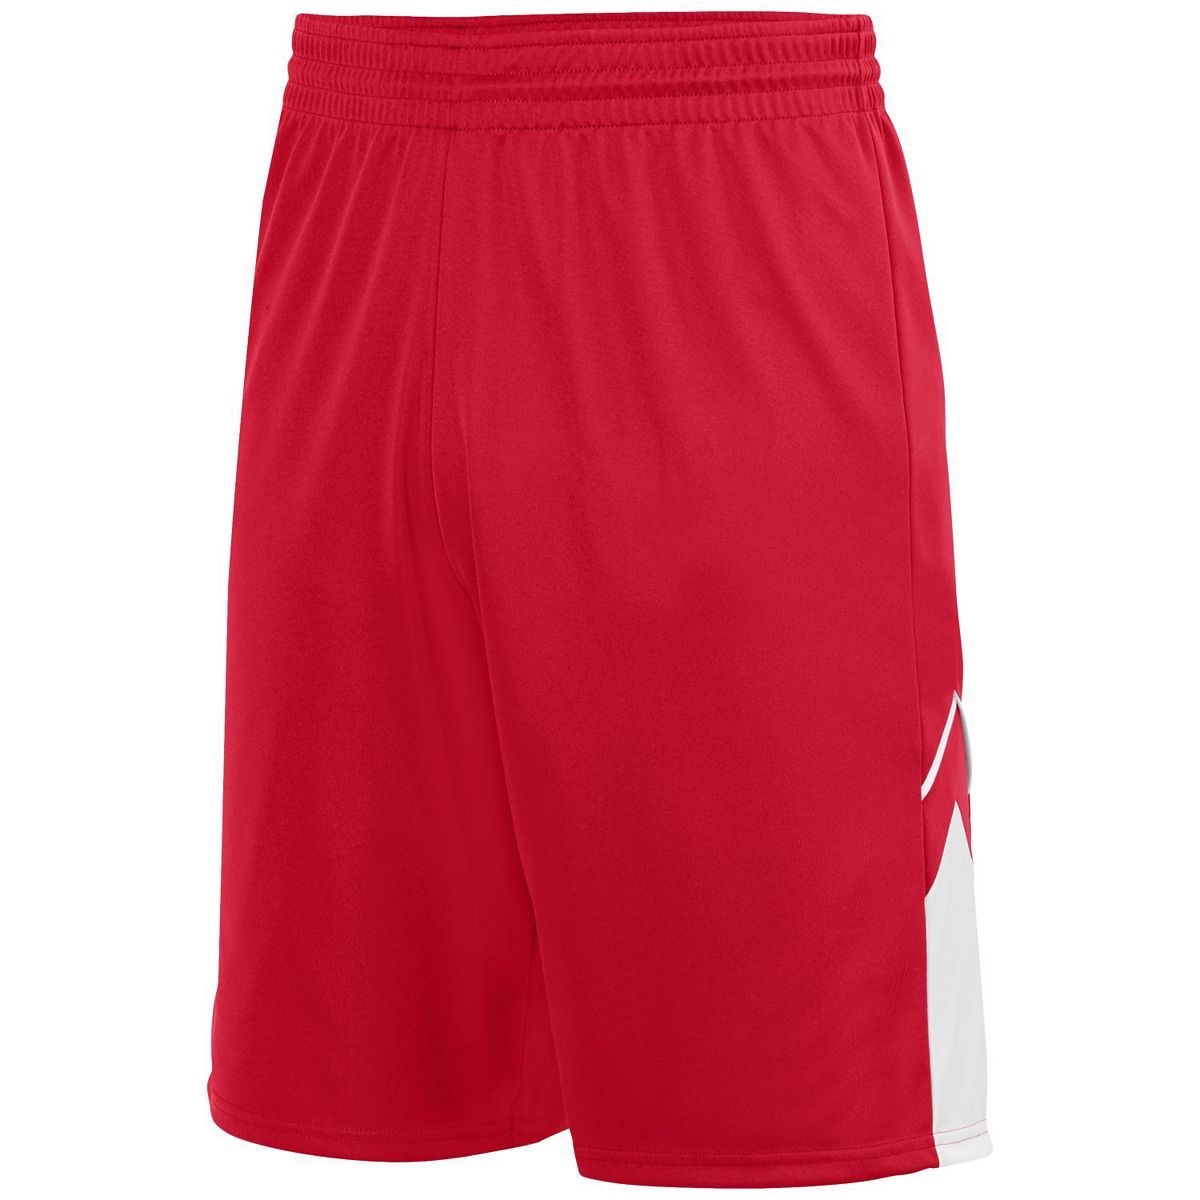 Augusta Sportswear Alley-Oop Reversible Shorts in Red/White  -Part of the Adult, Adult-Shorts, Augusta-Products, Basketball, All-Sports, All-Sports-1 product lines at KanaleyCreations.com